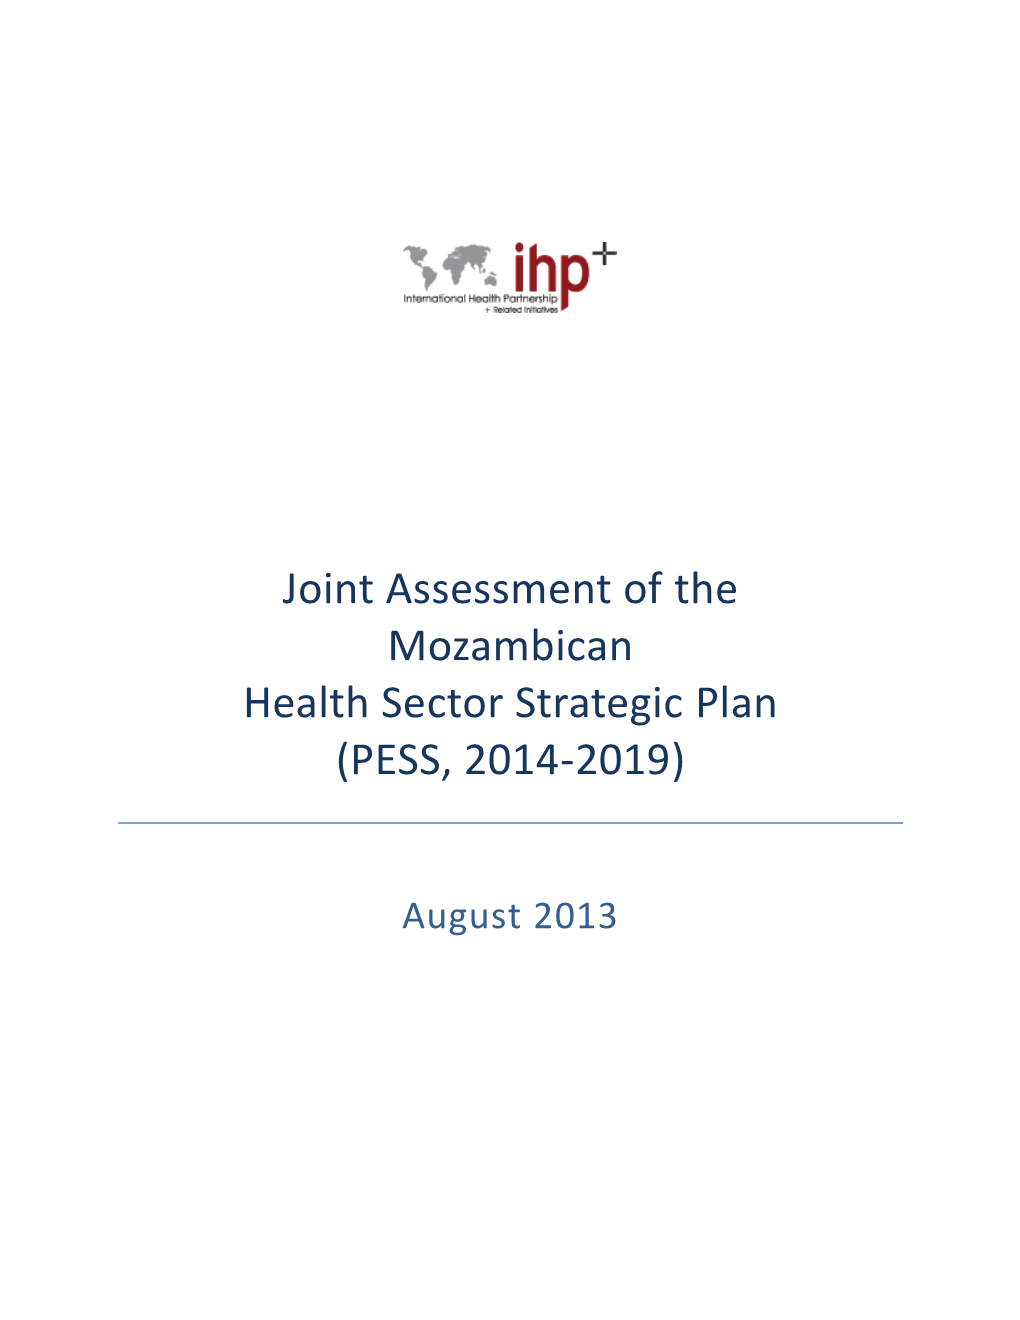 Joint Assessment of the Mozambican Health Sector Strategic Plan (PESS, 2014-2019)